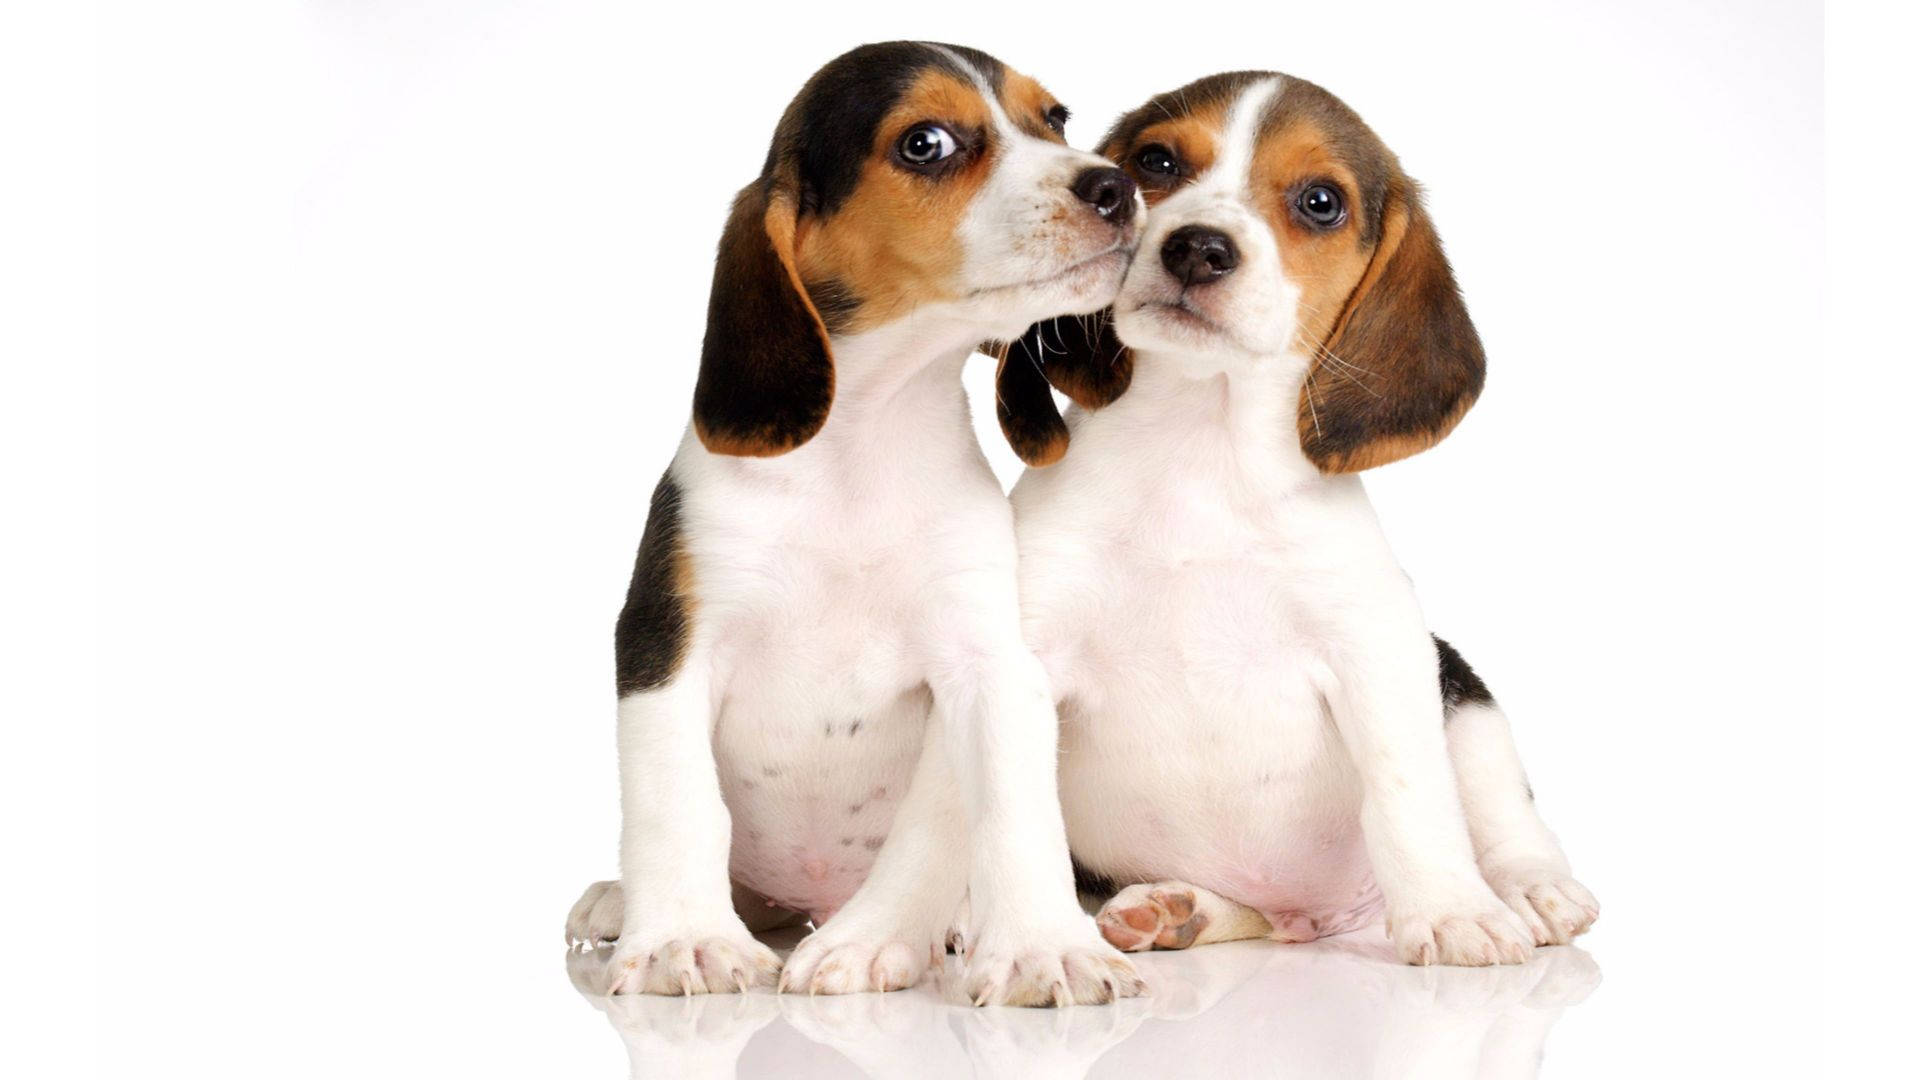 Two Puppy Beagle Dog Wallpaper